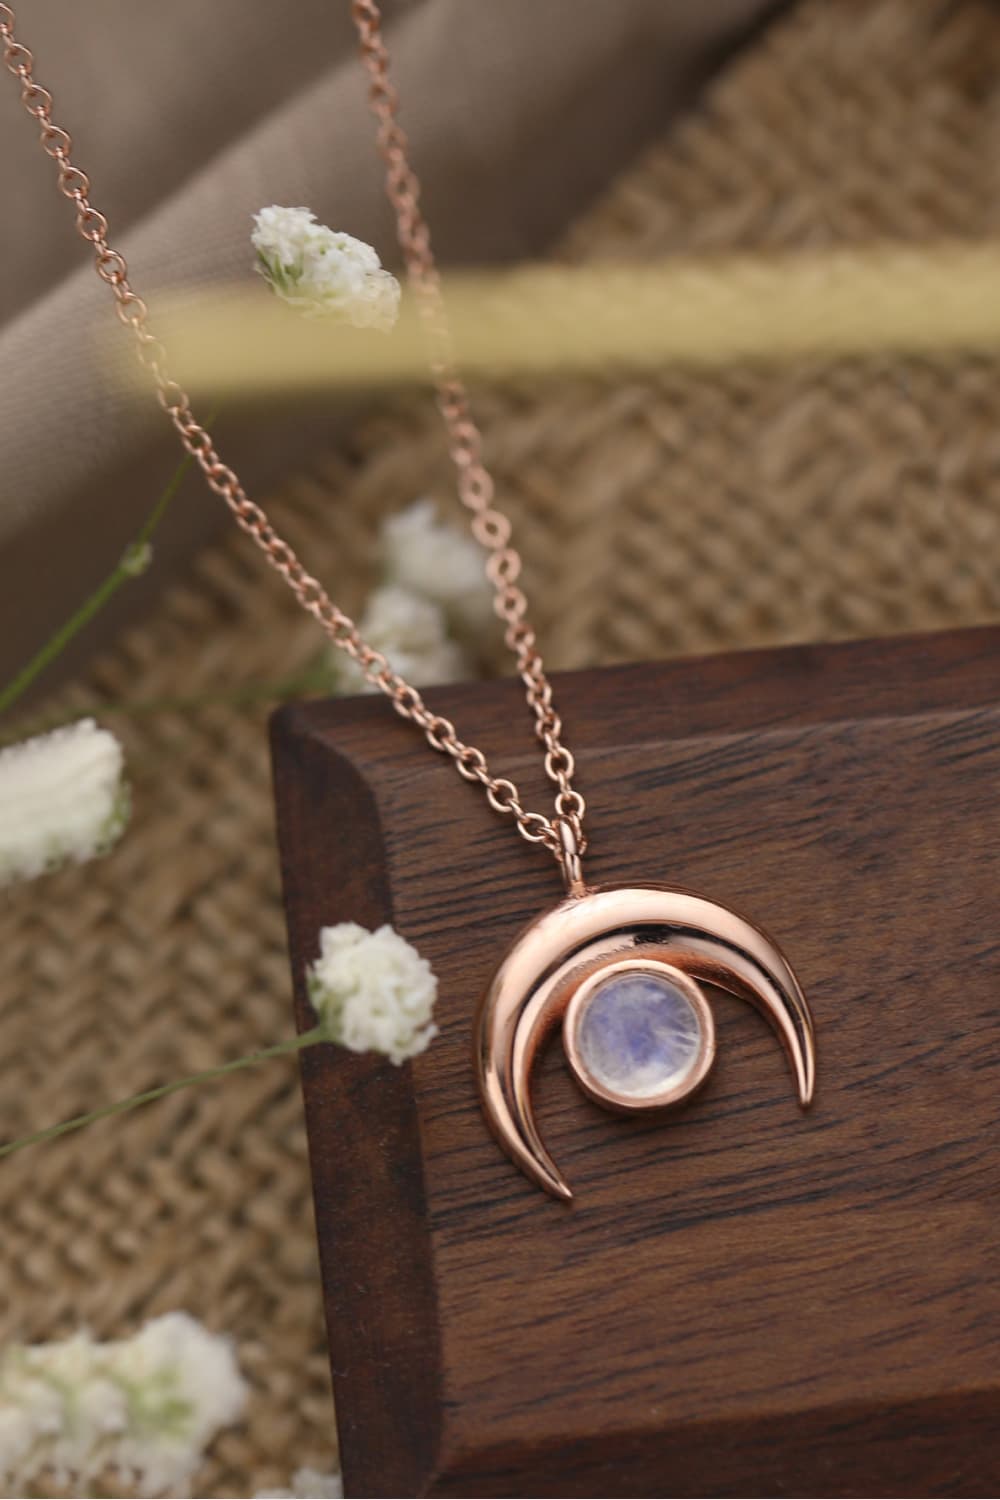 High Quality Natural Moonstone Moon Pendant 925 Sterling Silver Necklace BLUE ZONE PLANET